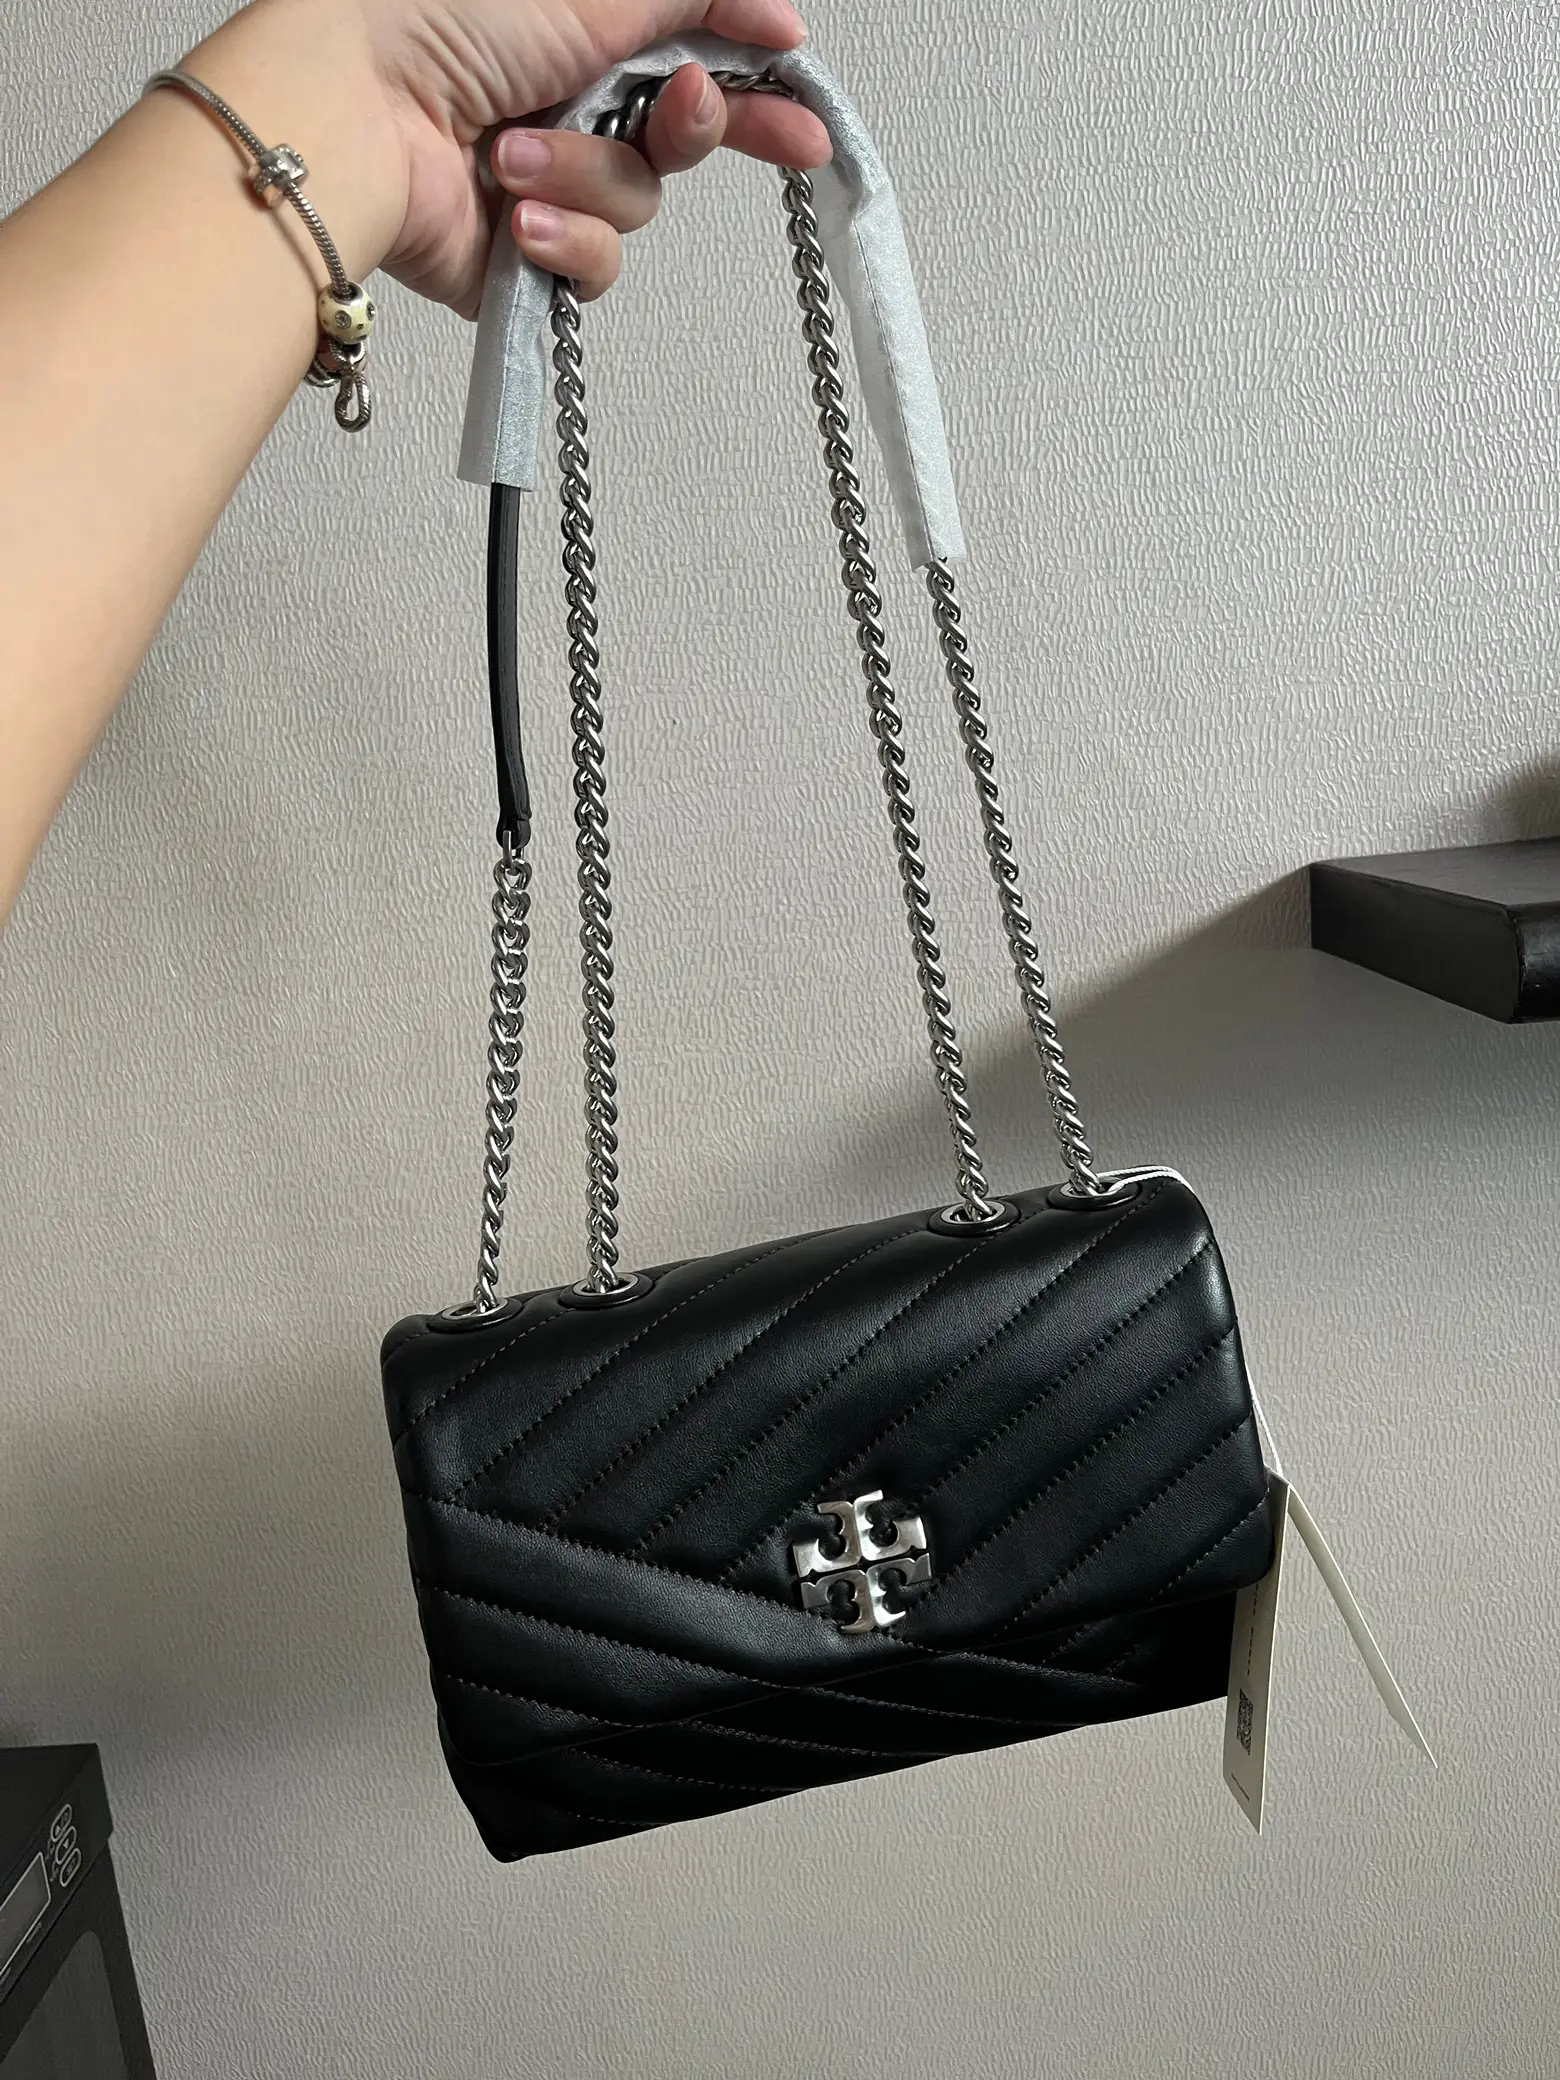 Review Totebag Tory Burch, Gallery posted by Nisya Istifani